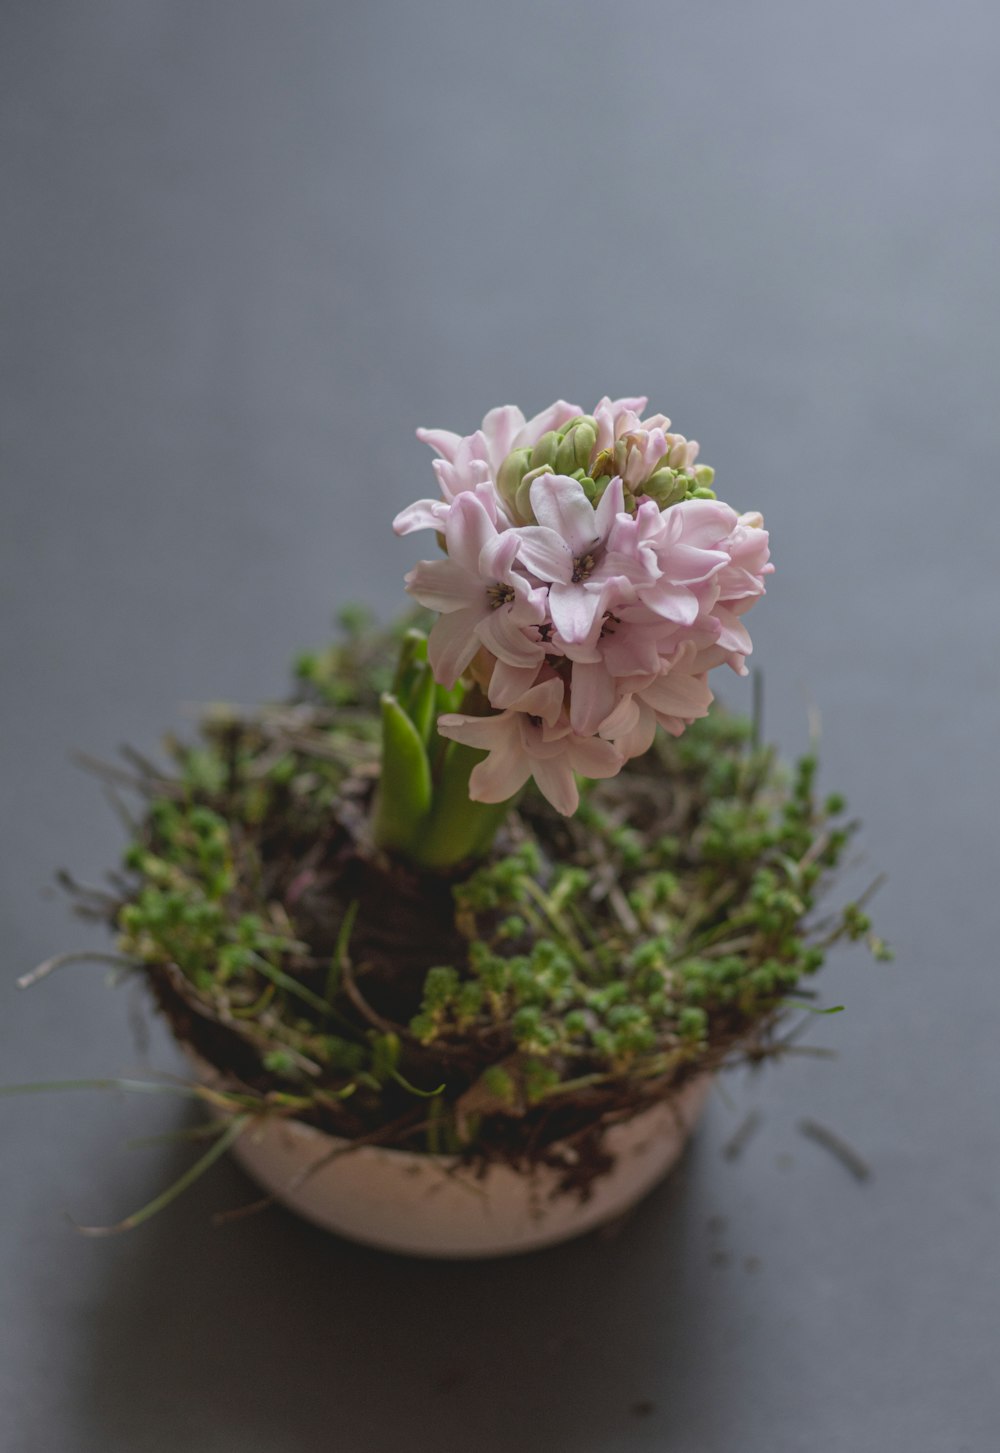 a small potted plant with pink flowers on a table